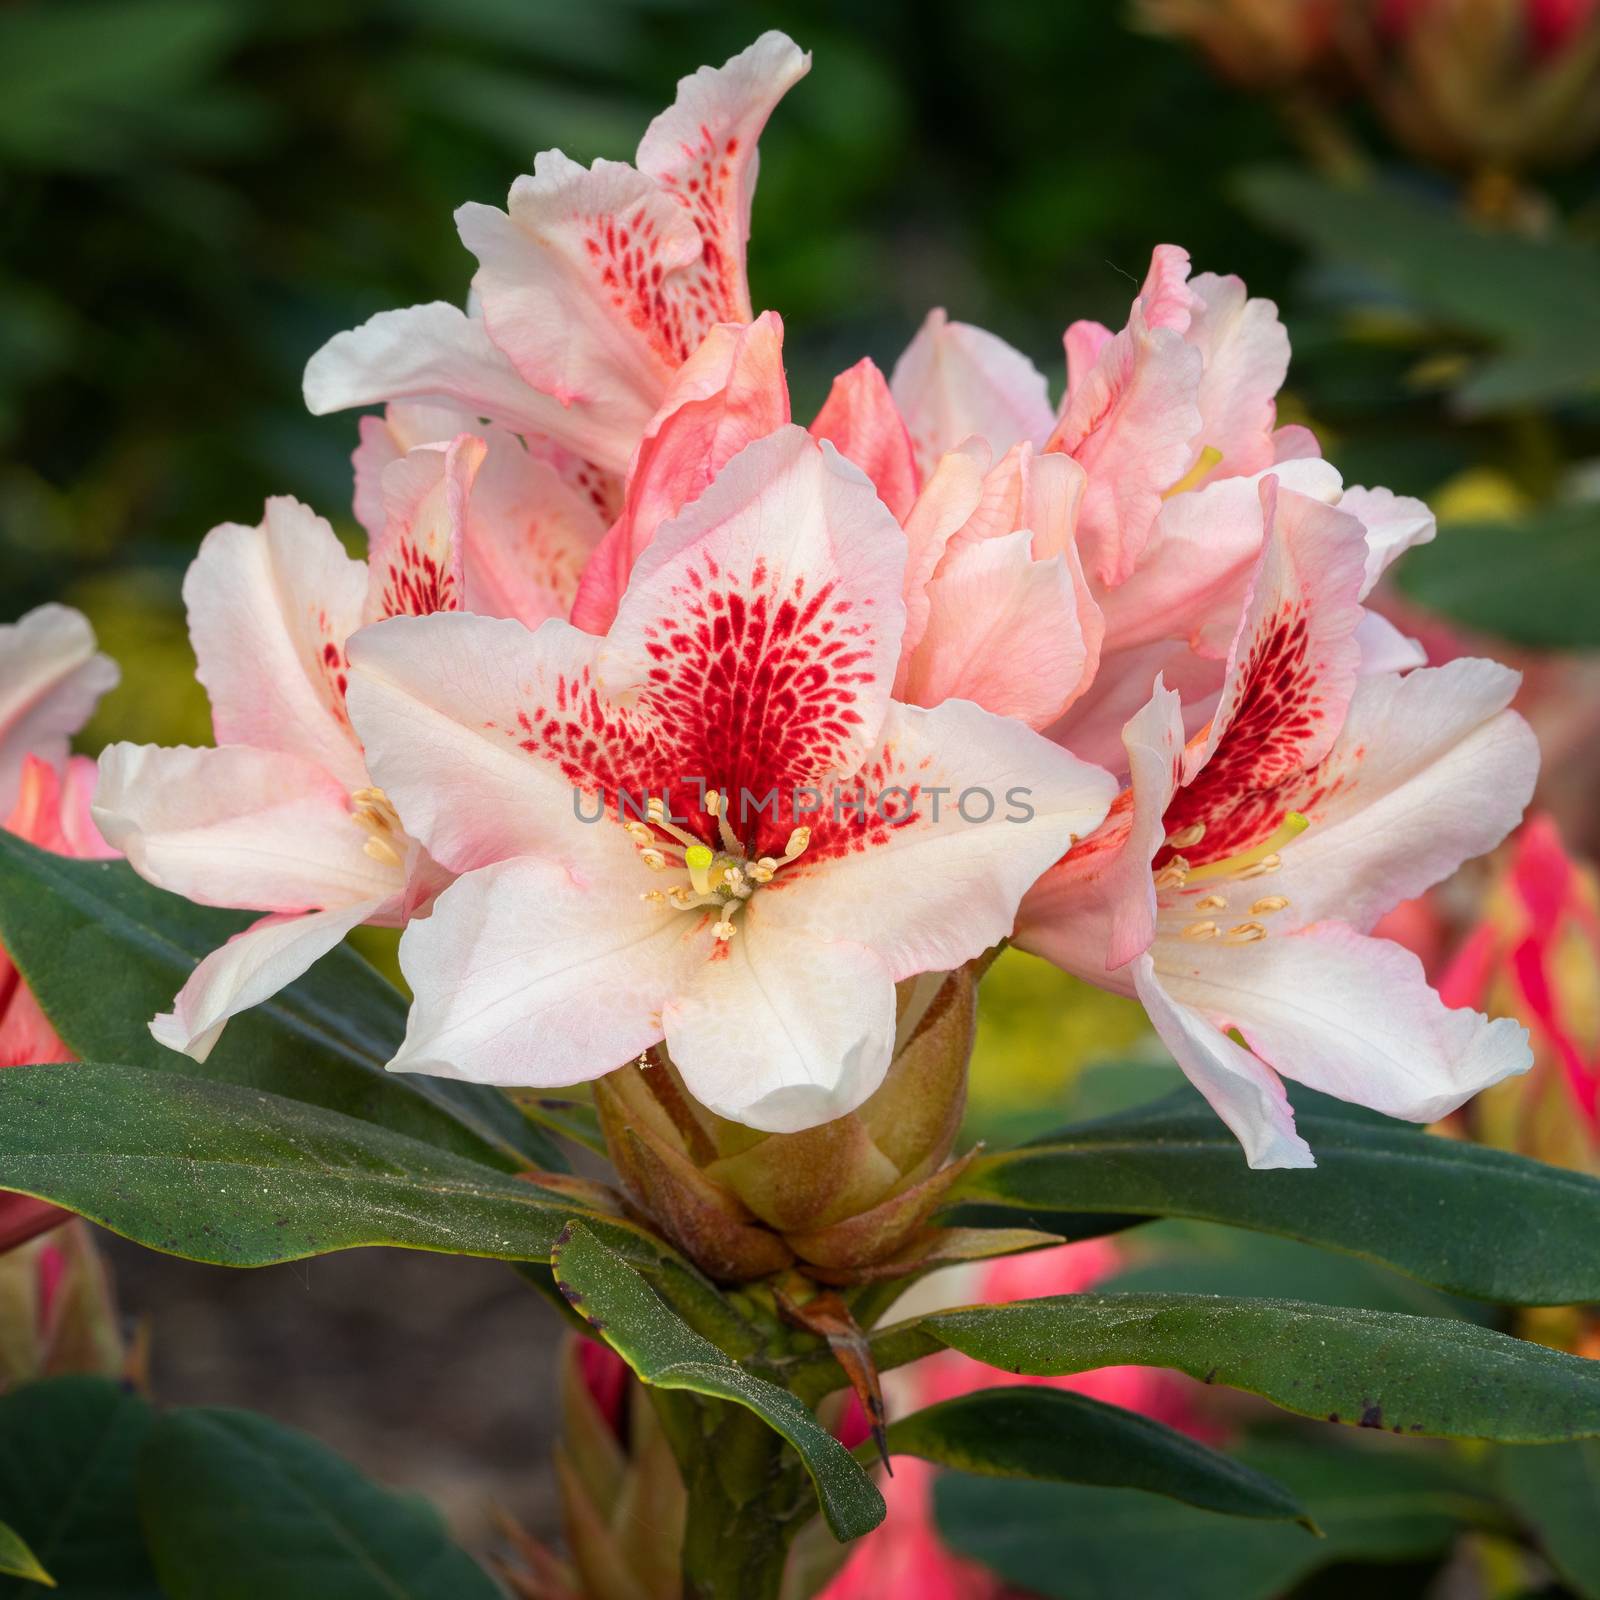 Rhododendron Hybrid Amber Kiss (Rhododendron hybride)